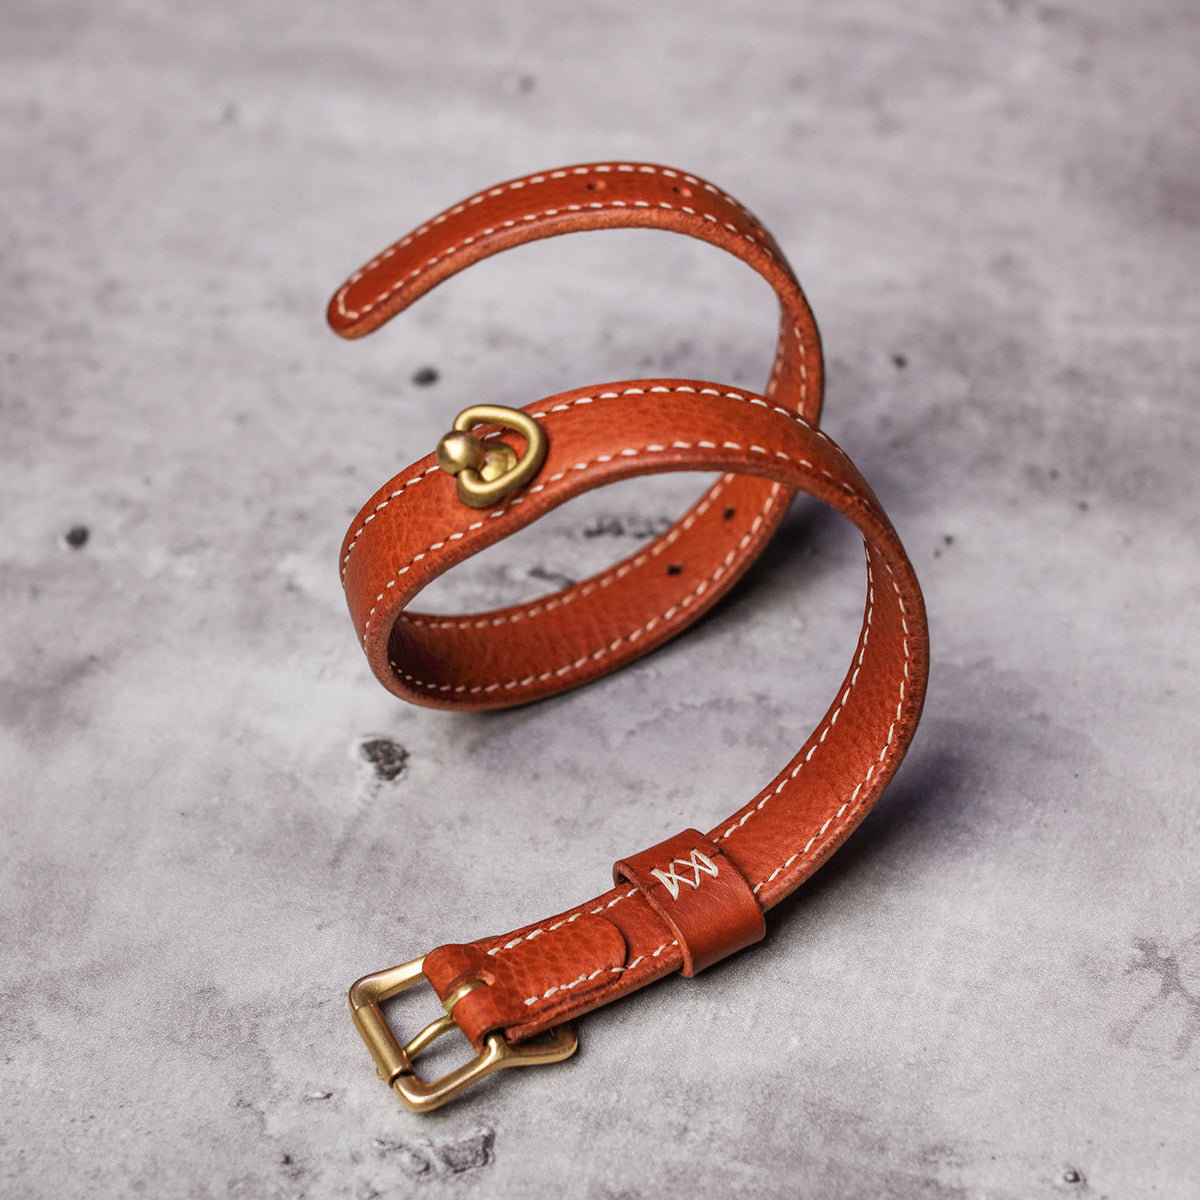 Italian M-Box Vegetable-Tanned Leather Collar/Choker with Leash